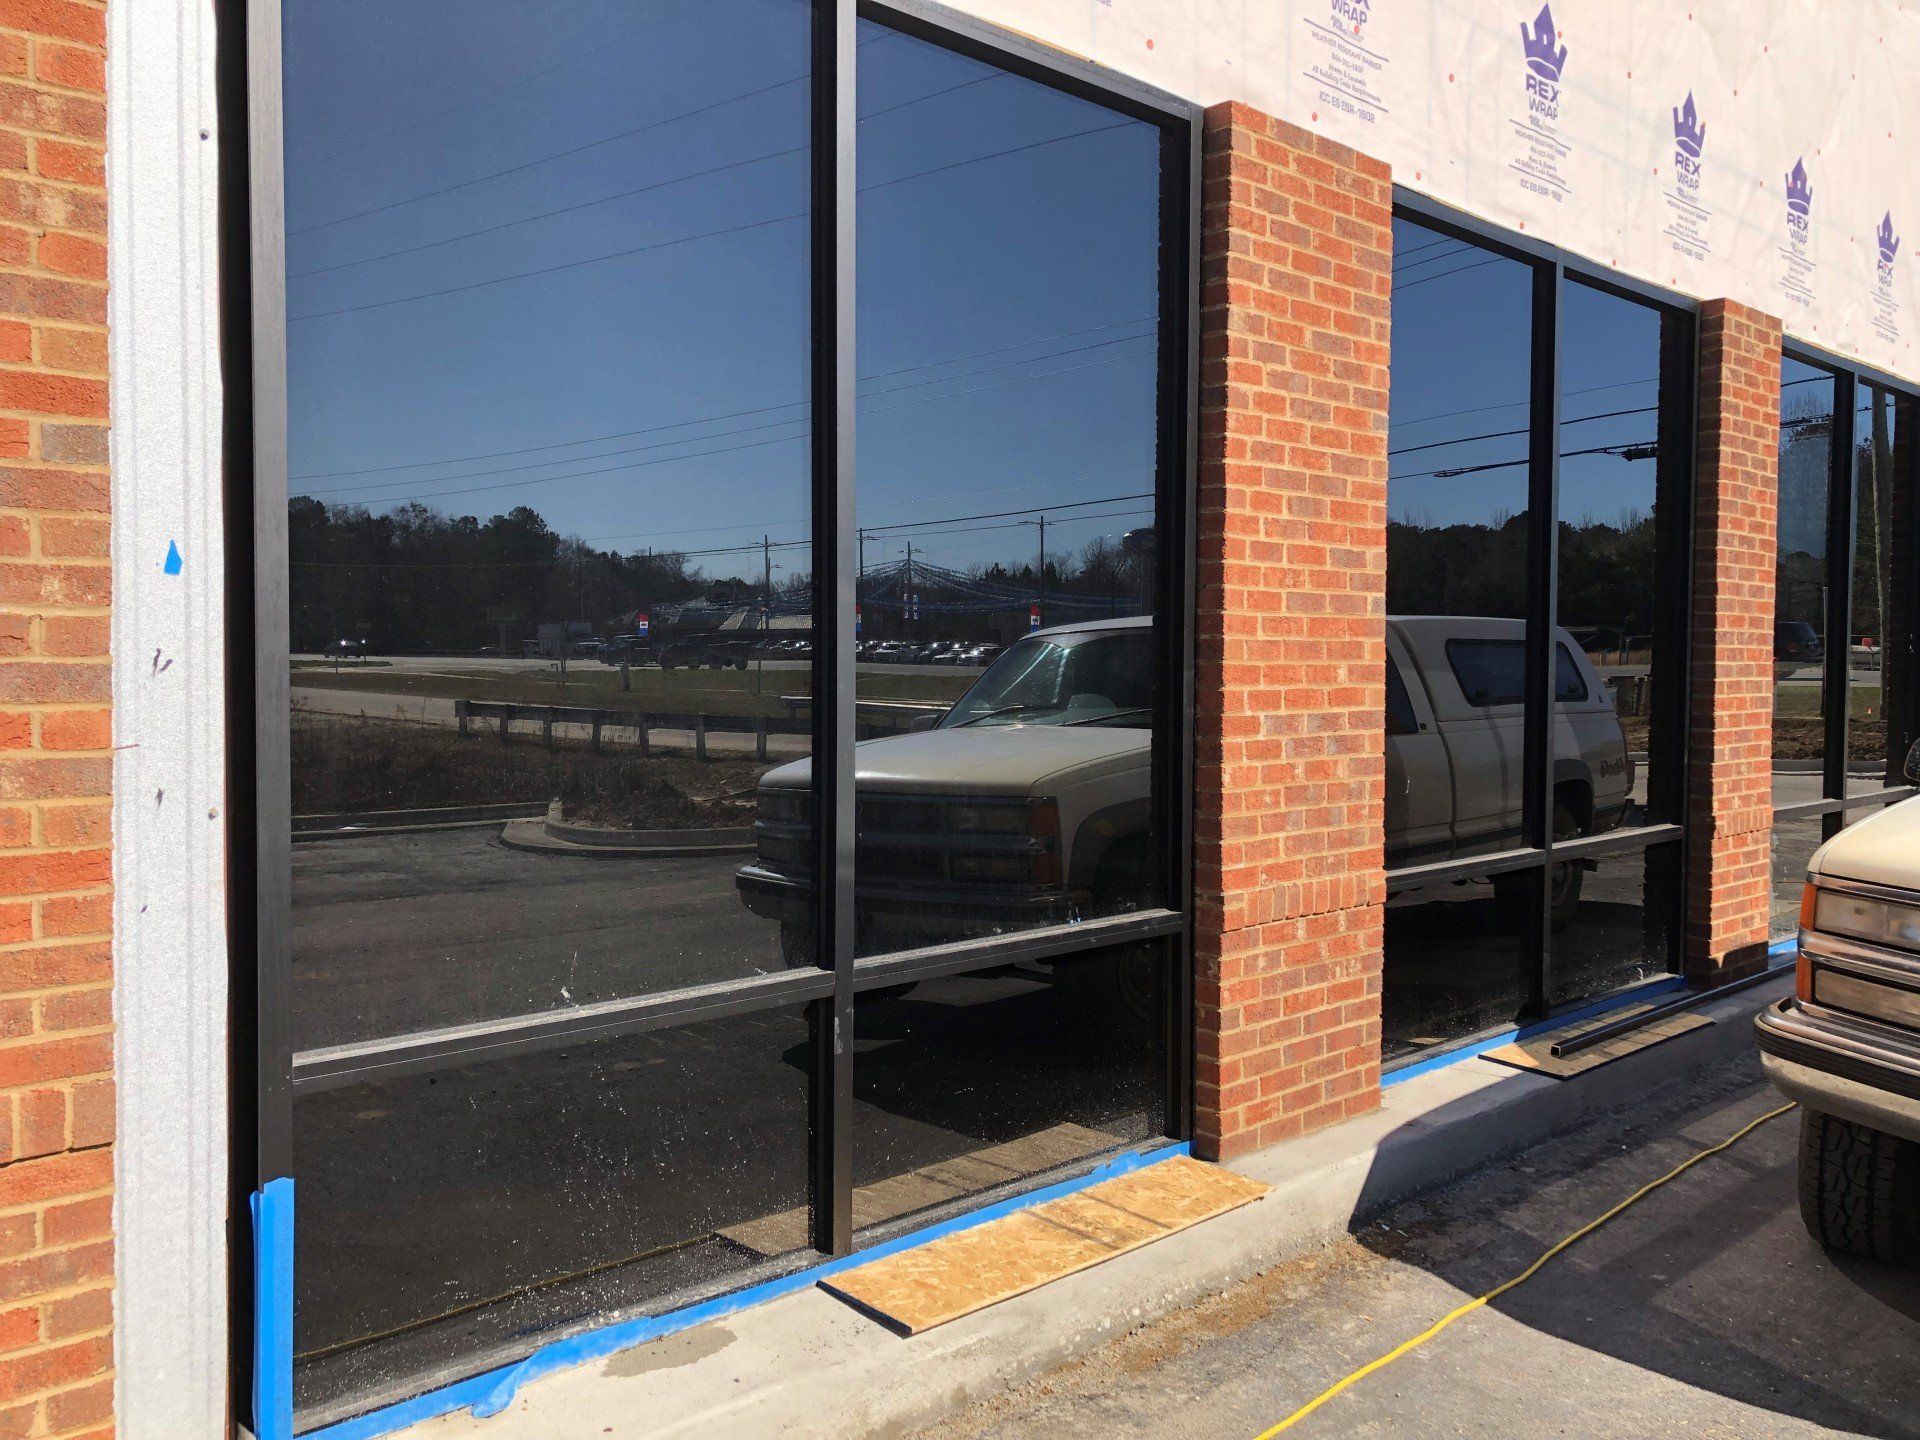 spf tint installed on 1.31.2019 at Pizza Hut in Wetumpka - after store window tint installed in Wetumpka, AL pic 4